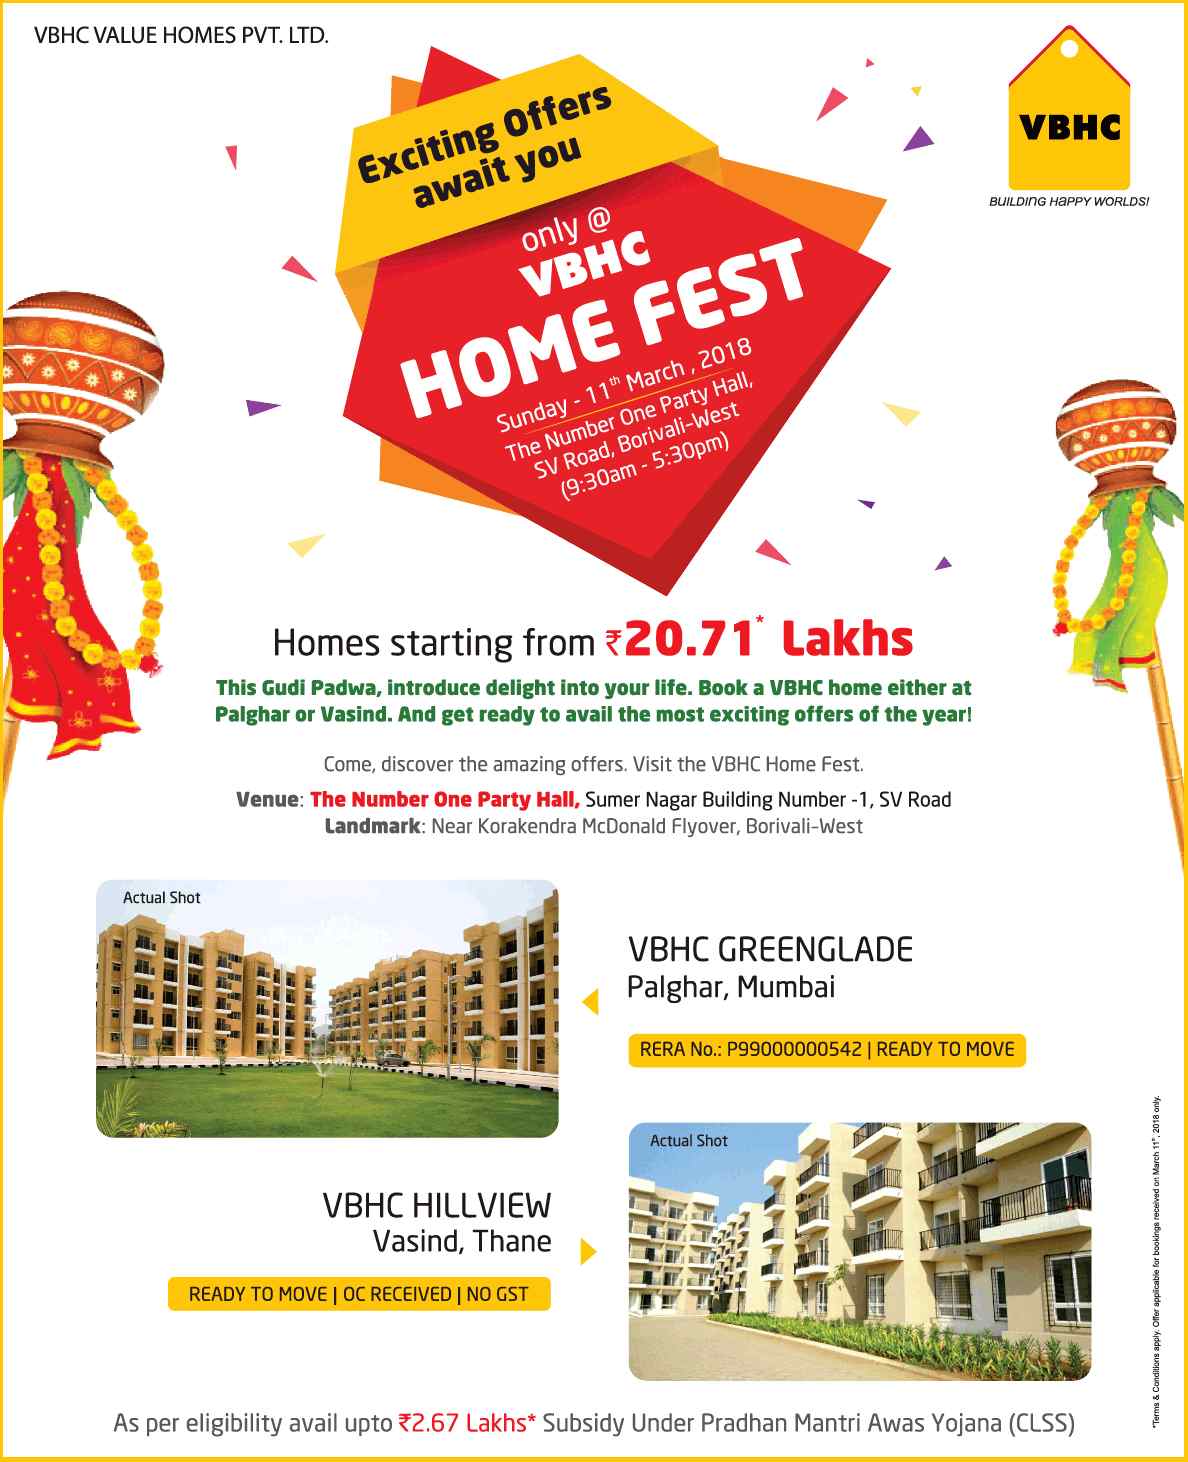 Invest in VBHC Homes starting at Rs. 20.71 Lakhs in Mumbai